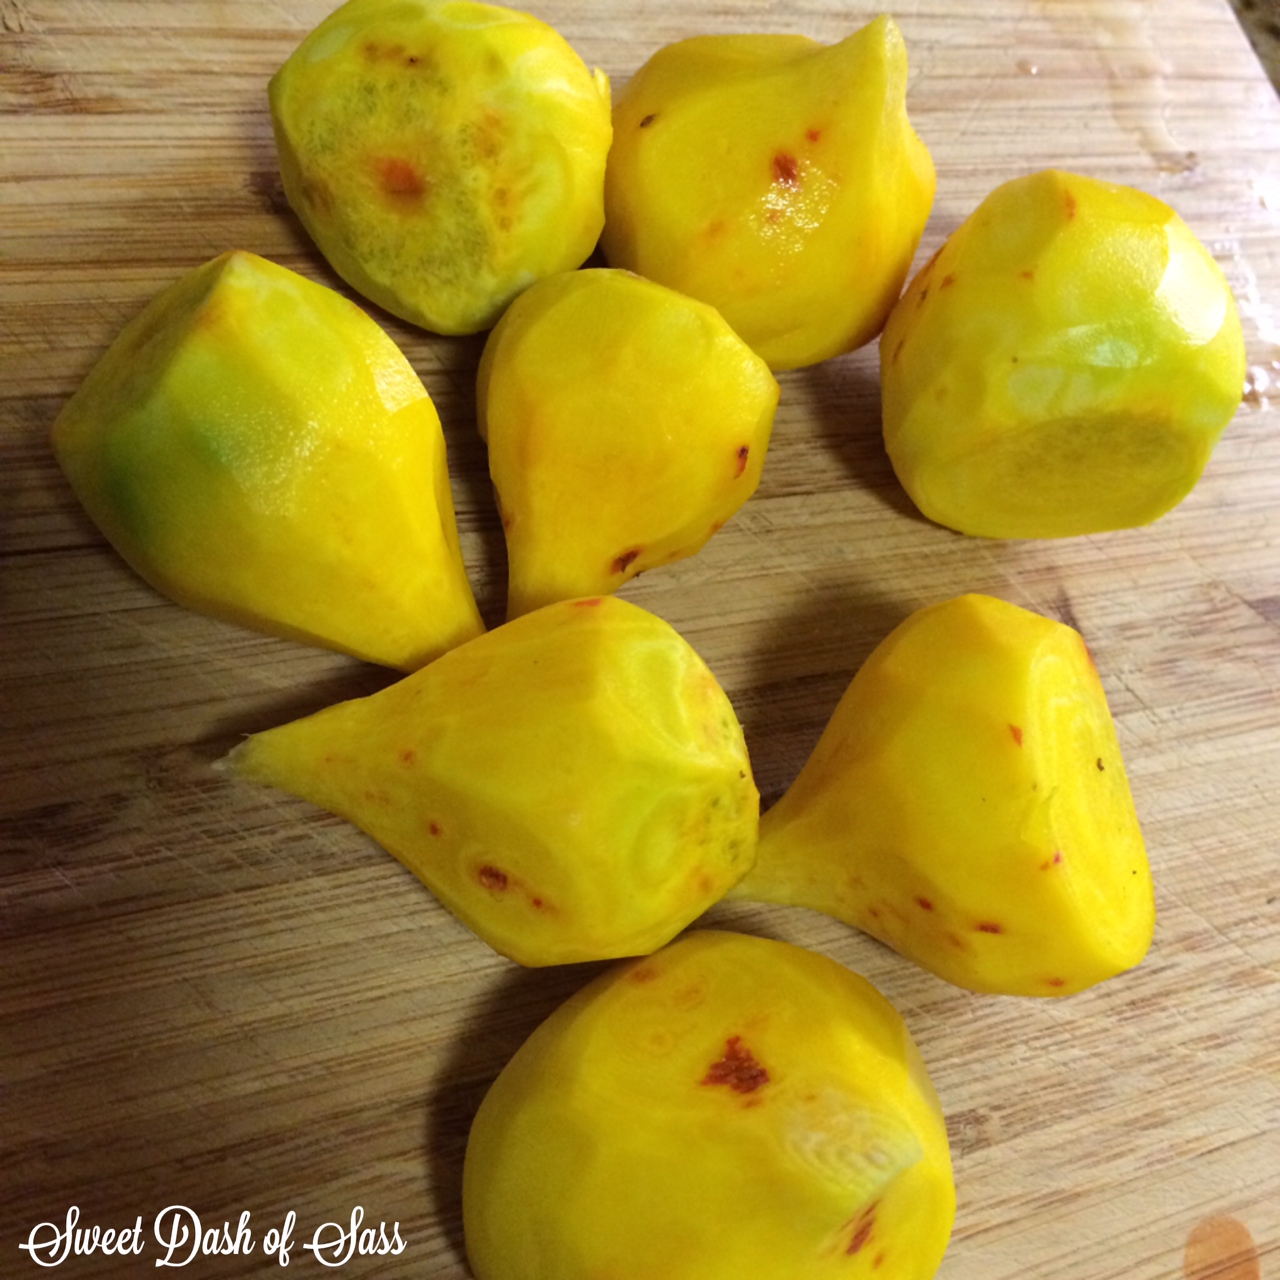 Roasted Golden Beets - www.SweetDashofSass.com